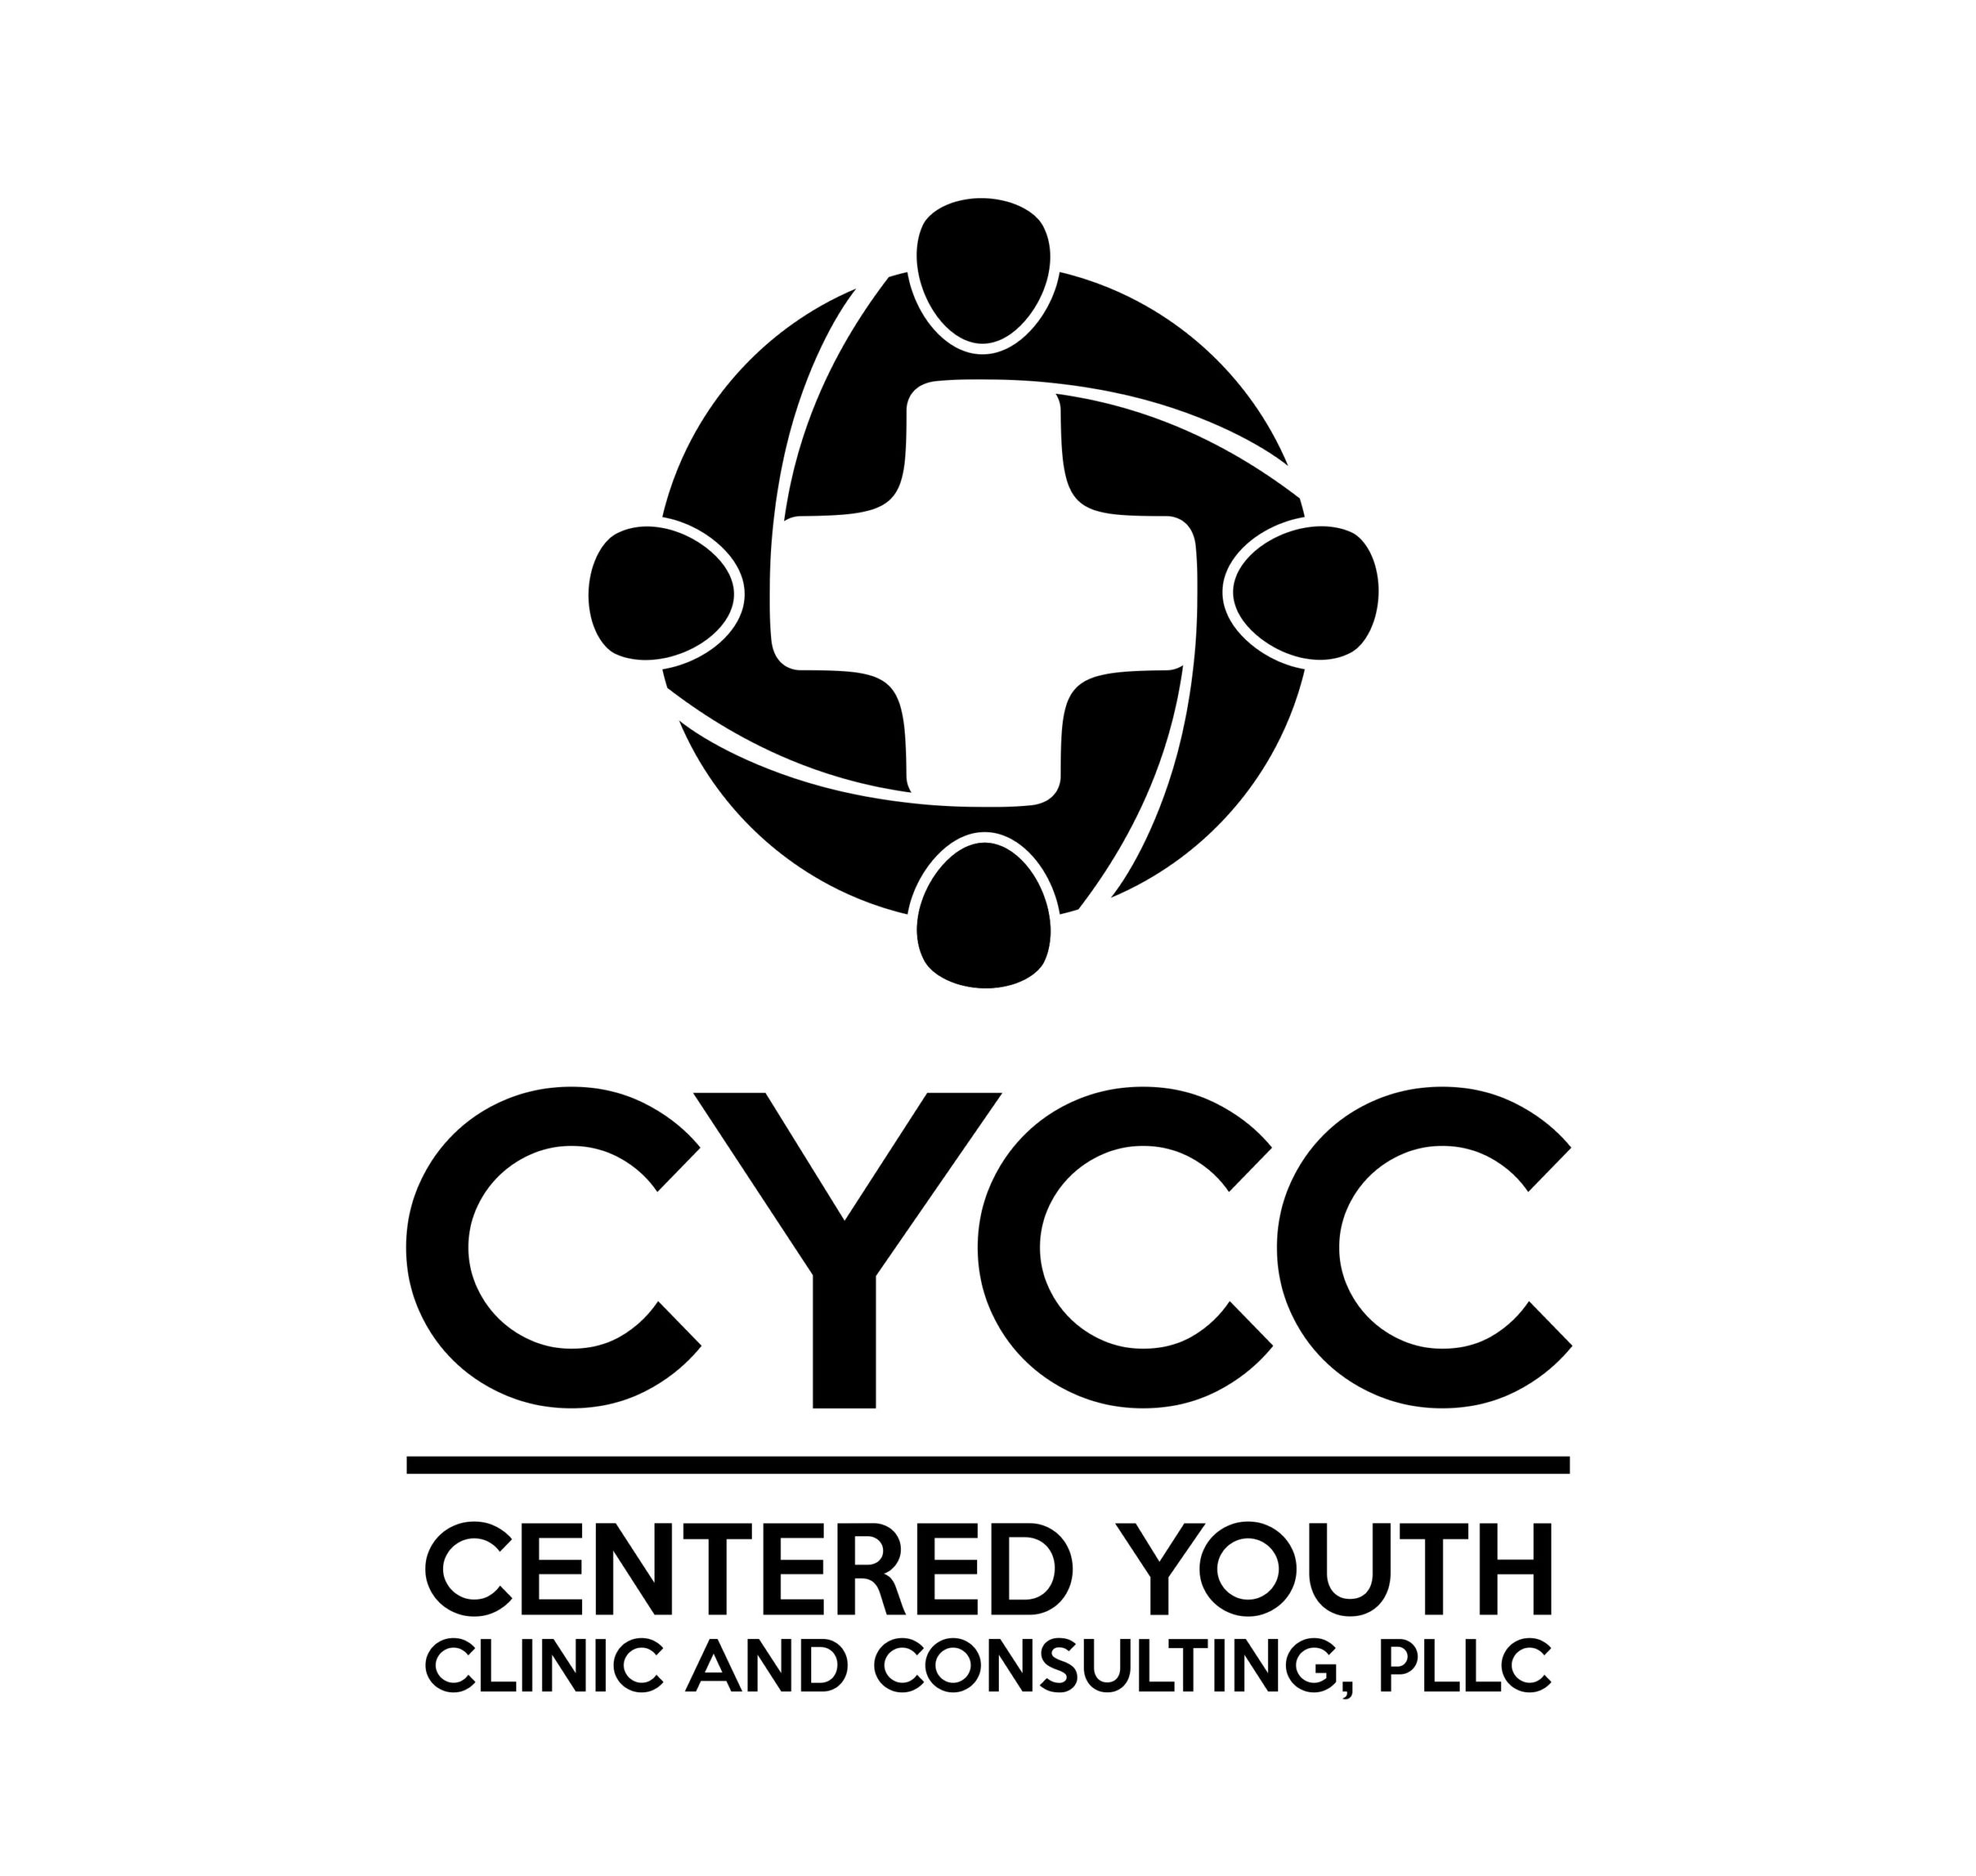 Centered Youth Clinic & Consulting